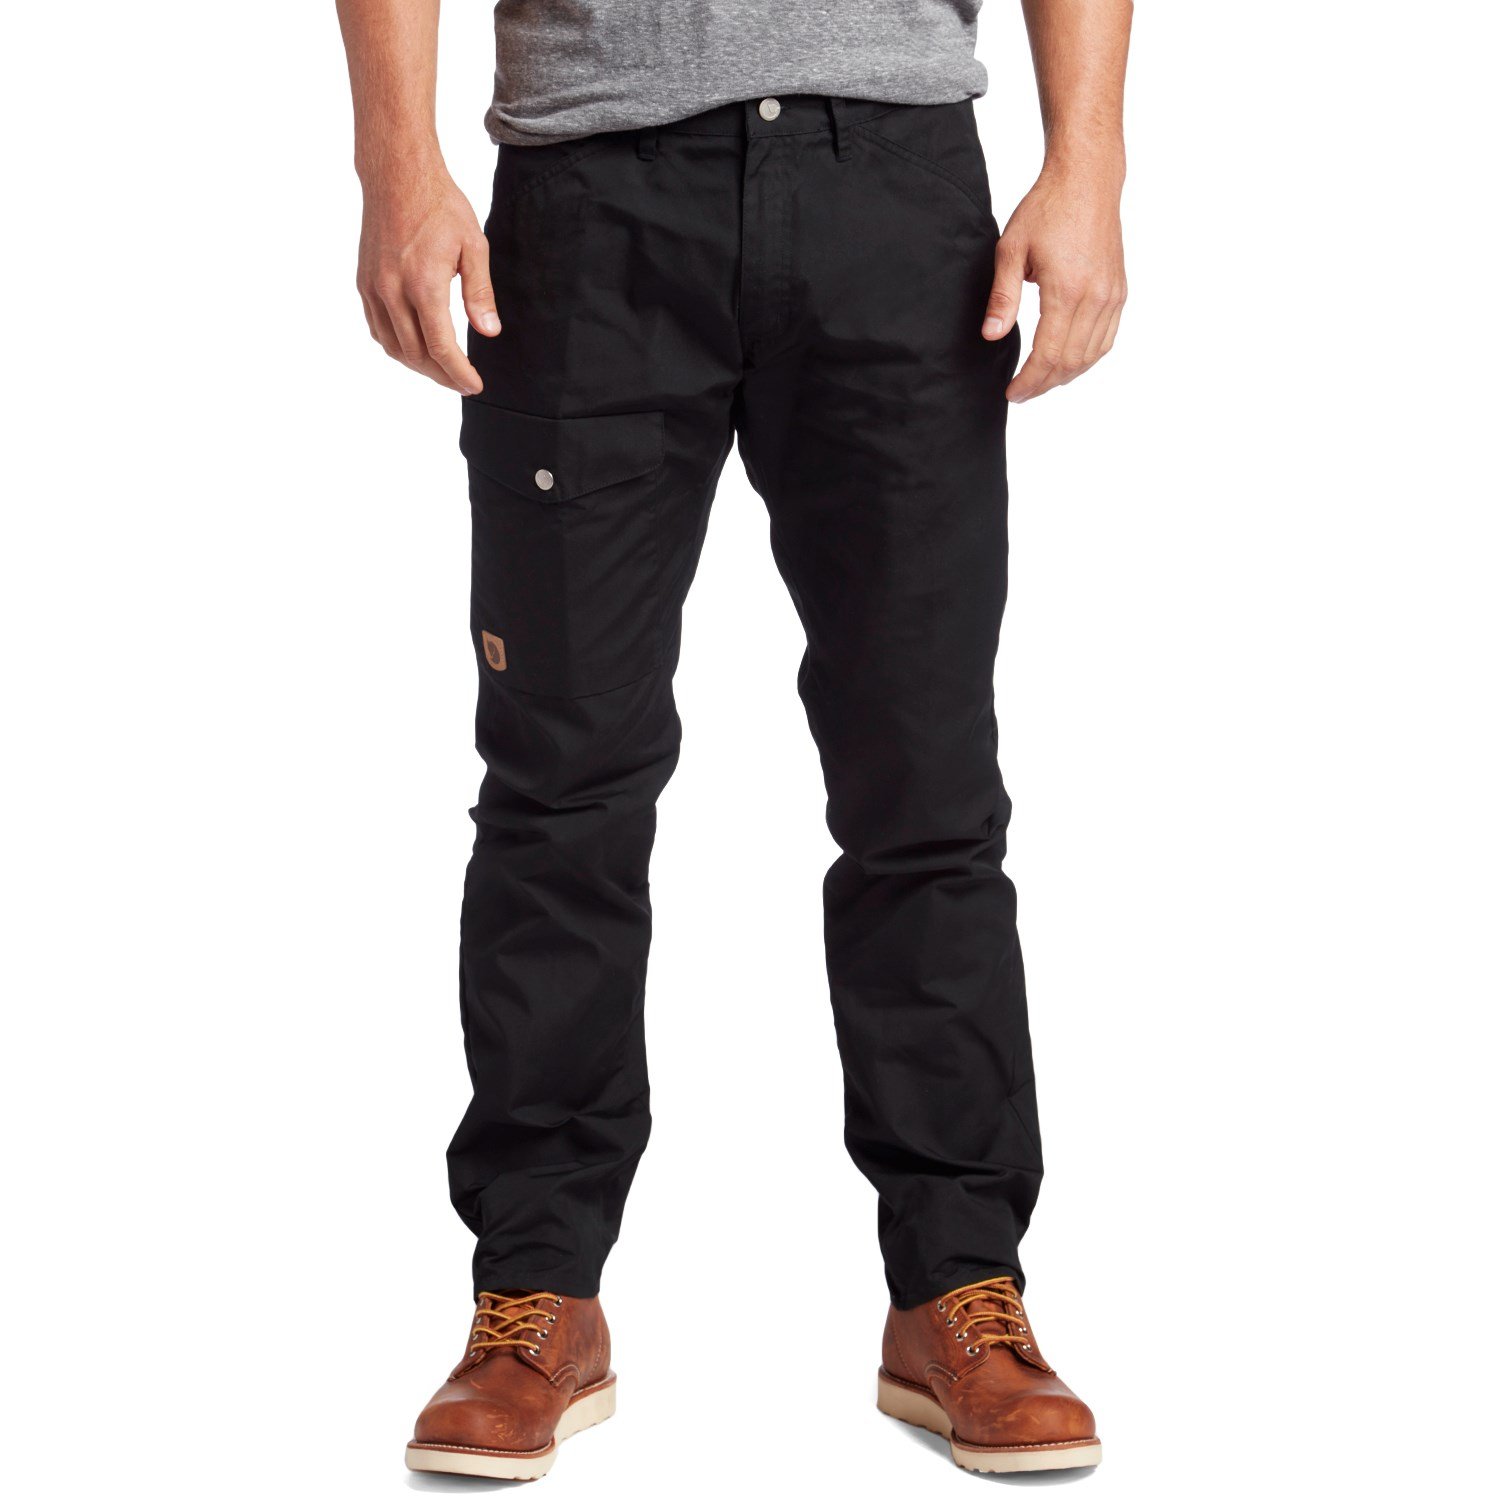 Embed Five log Fjallraven Greenland Jeans Black Clearance, SAVE 44% - aveclumiere.com